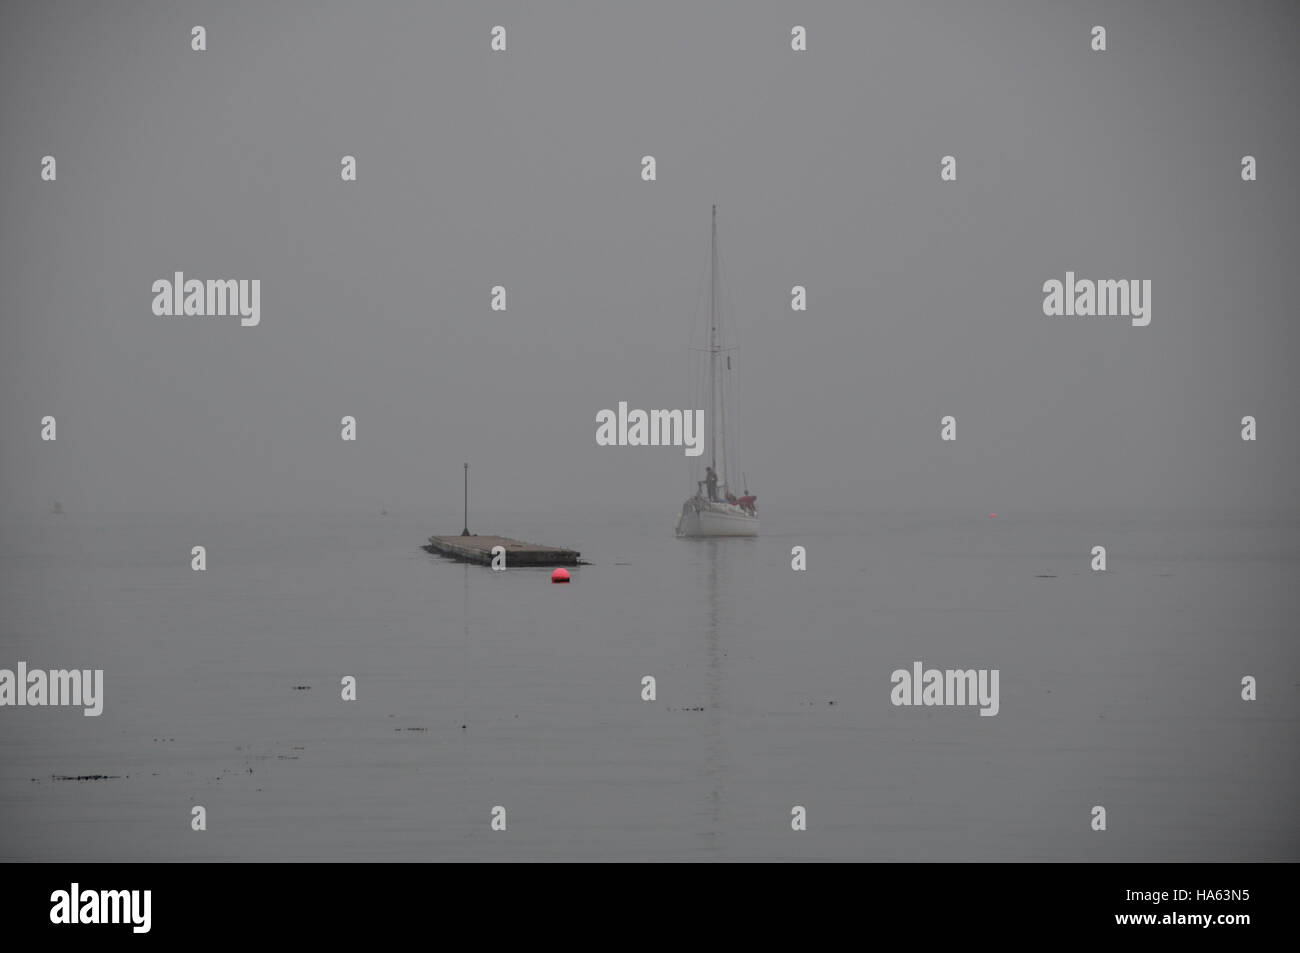 A yacht approaches Dale Outer Pontoon after a passage in heavy fog Stock Photo